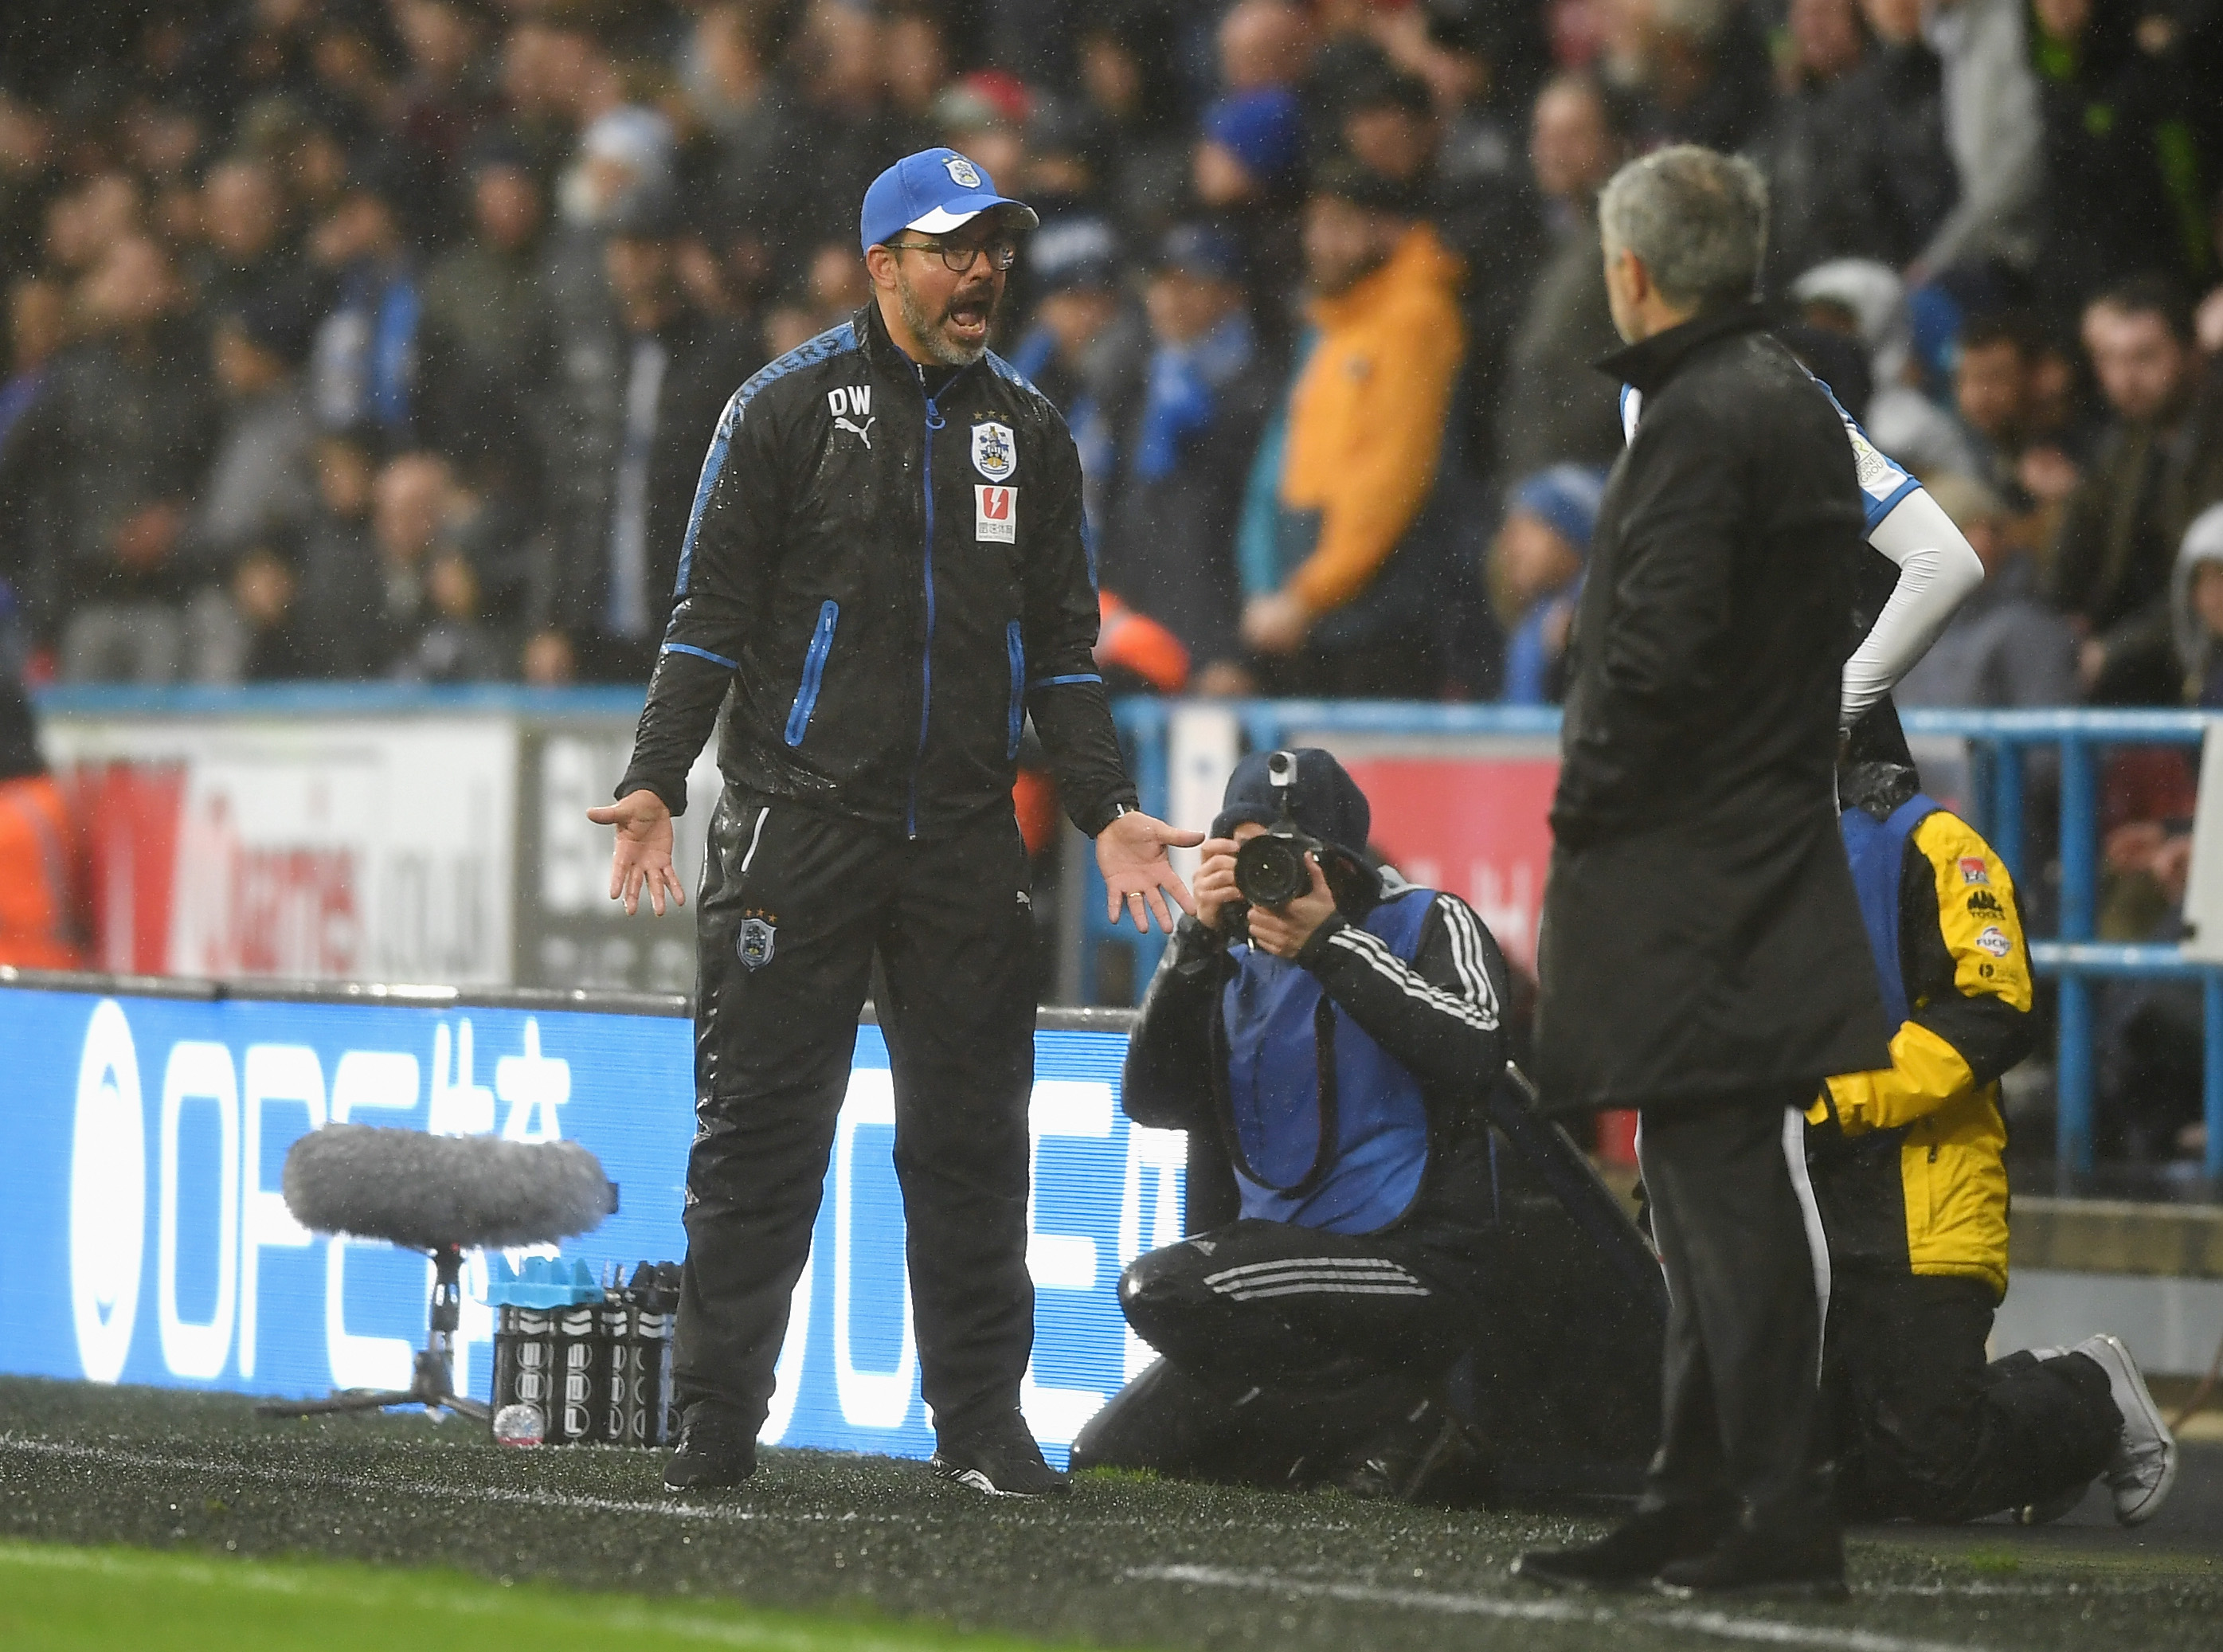 HUDDERSFIELD, ENGLAND - OCTOBER 21:  David Wagner, Manager of Huddersfield Town reacts as Jose Mourinho, Manager of Manchester United looks on during the Premier League match between Huddersfield Town and Manchester United at John Smith's Stadium on October 21, 2017 in Huddersfield, England.  (Photo by Gareth Copley/Getty Images)